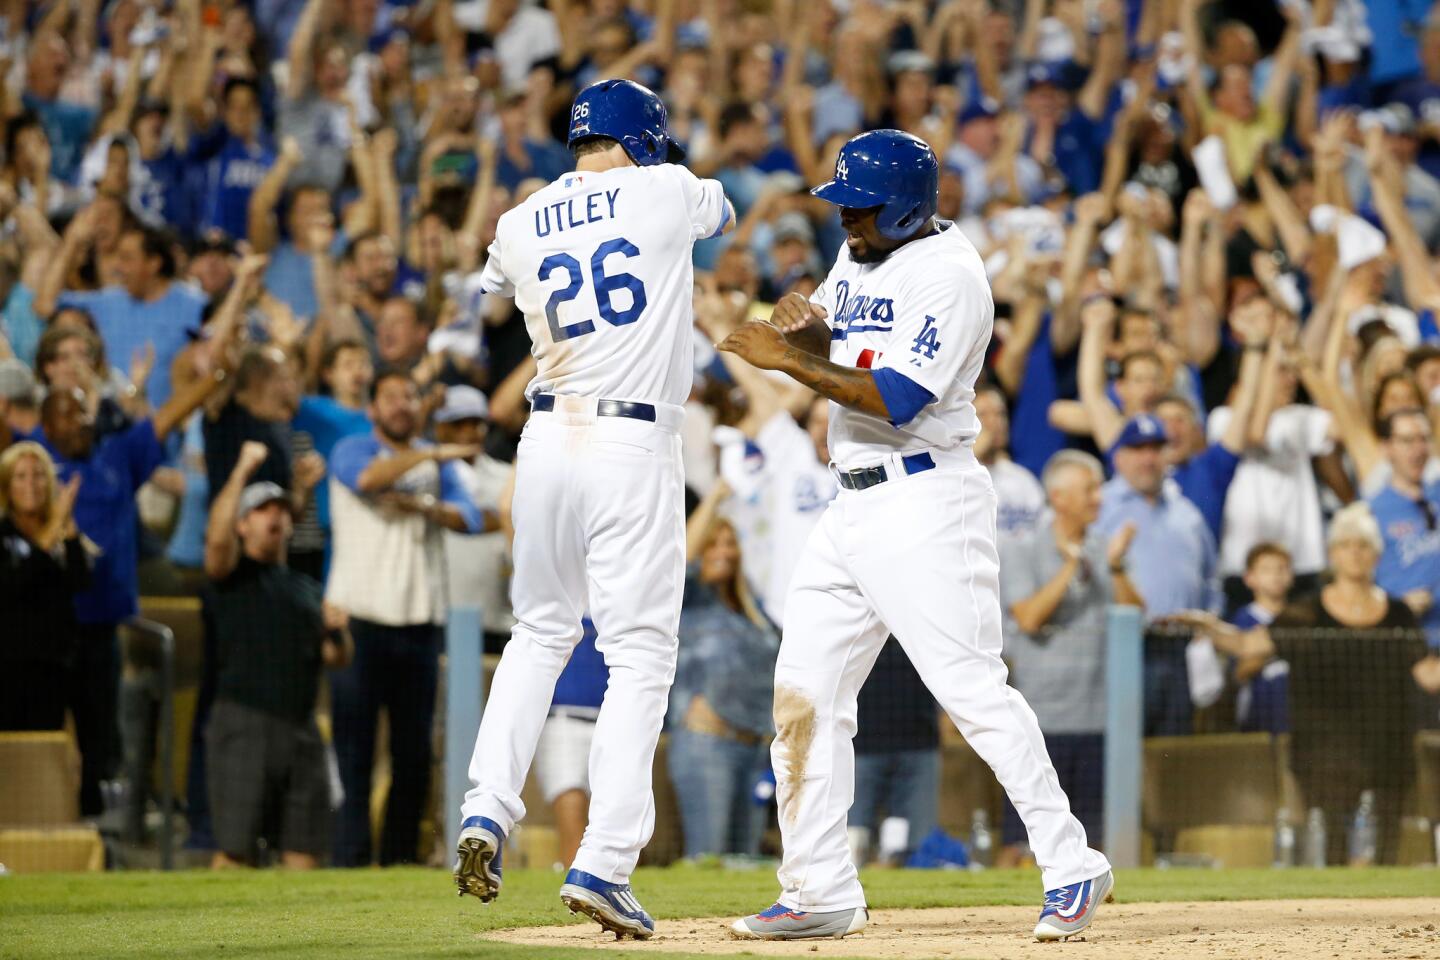 Chase Utley #26 and Howie Kendrick #47 of the Los Angeles Dodgers celebrate after scoring on a two-RBI double by Adrian Gonzalez #23 in the seventh inning against the New York Mets in game two of the National League Division Series at Dodger Stadium.